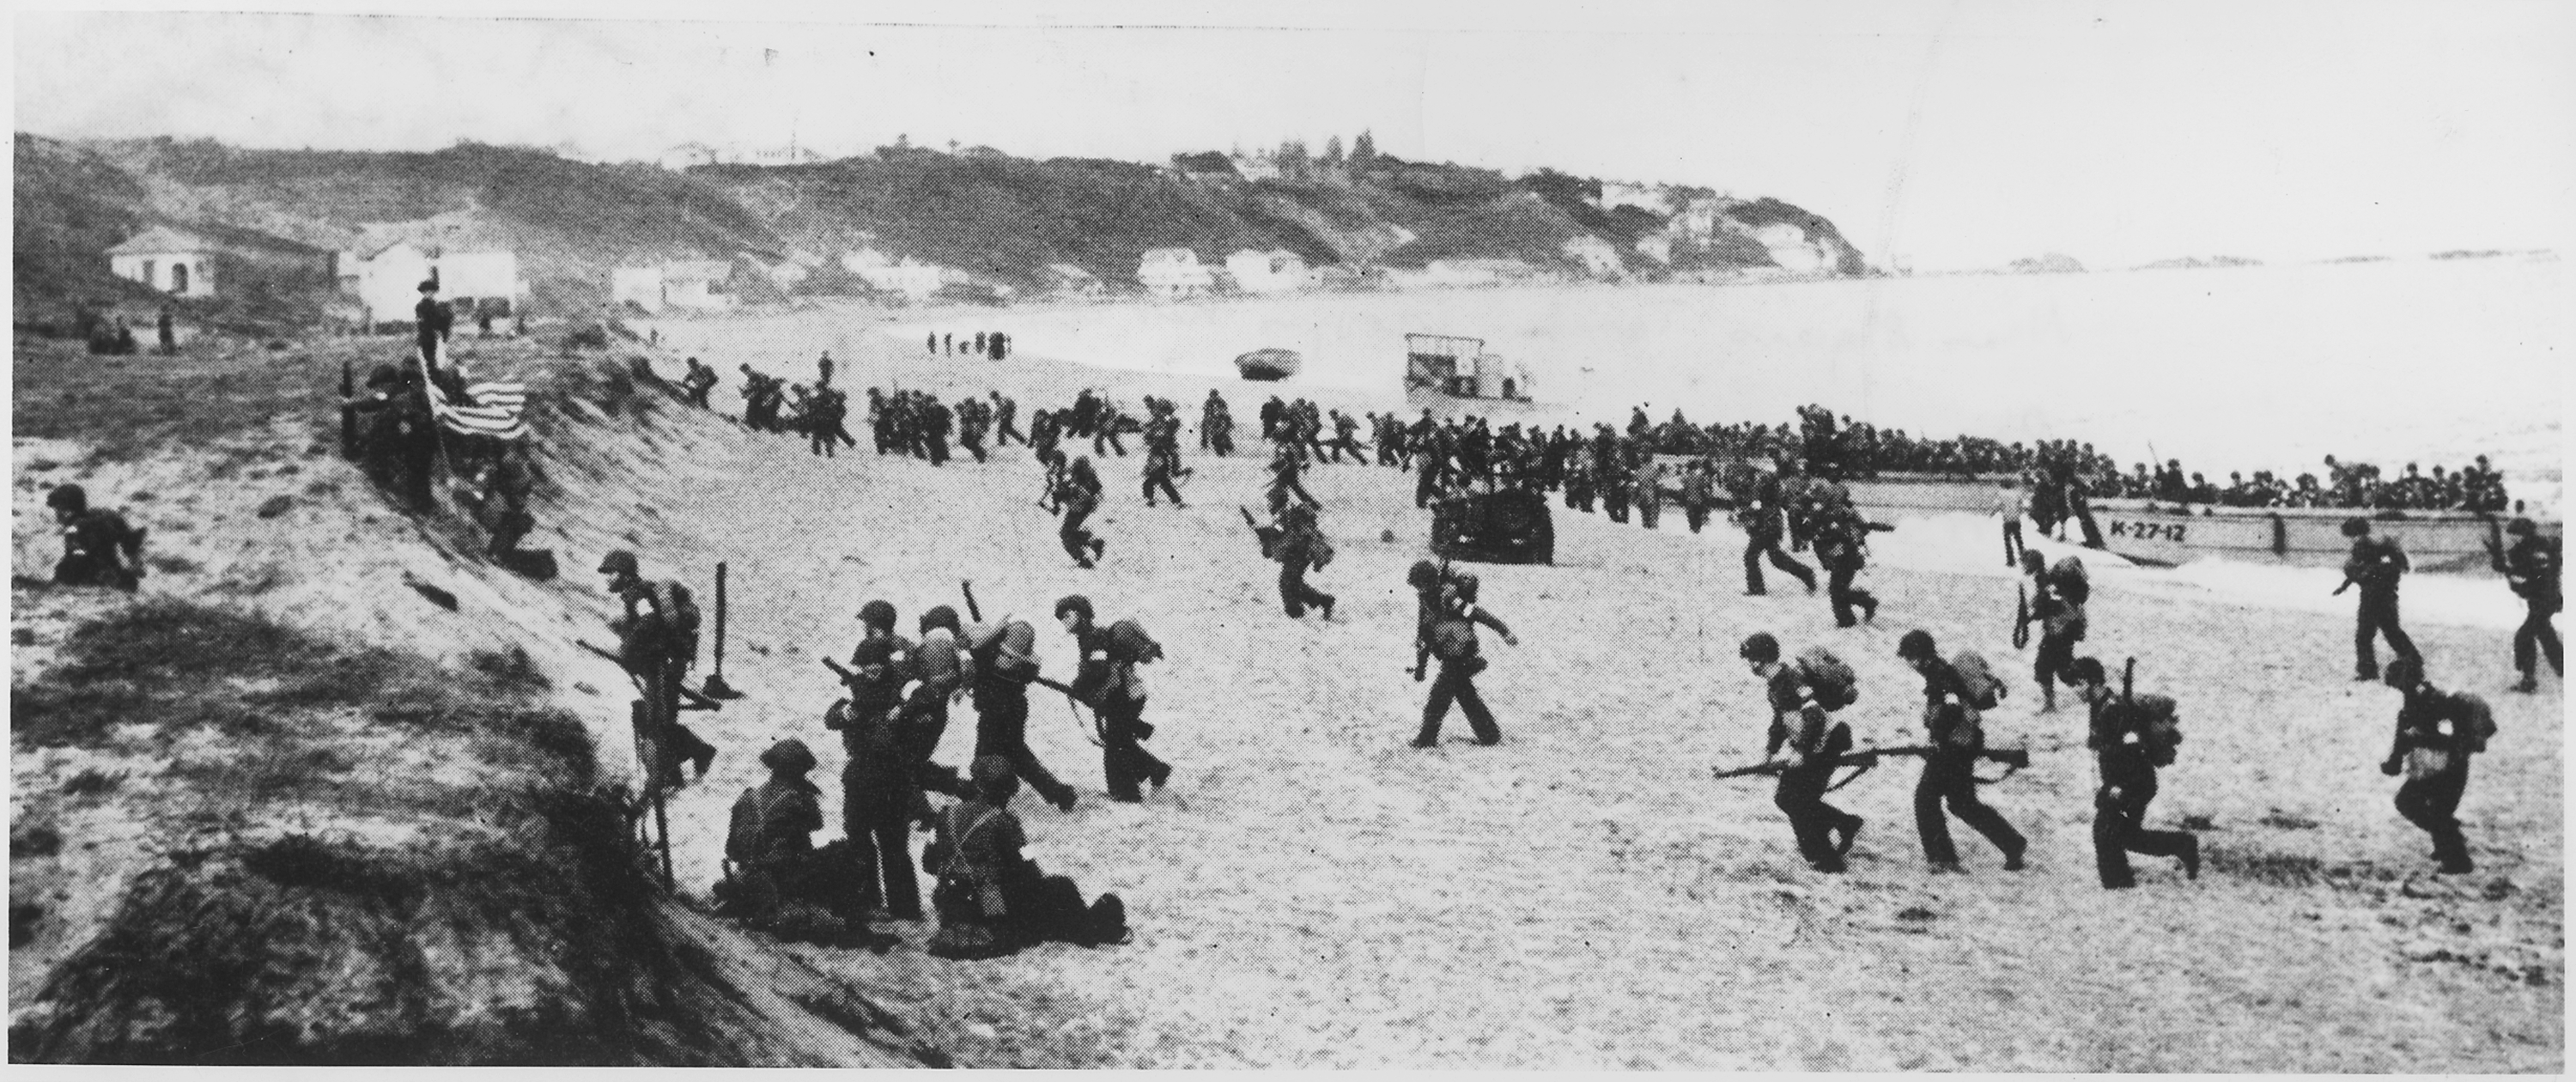 Near Algiers, Torch Troops Hit The Beaches Behind A Large American Flag Left Hoping For Th